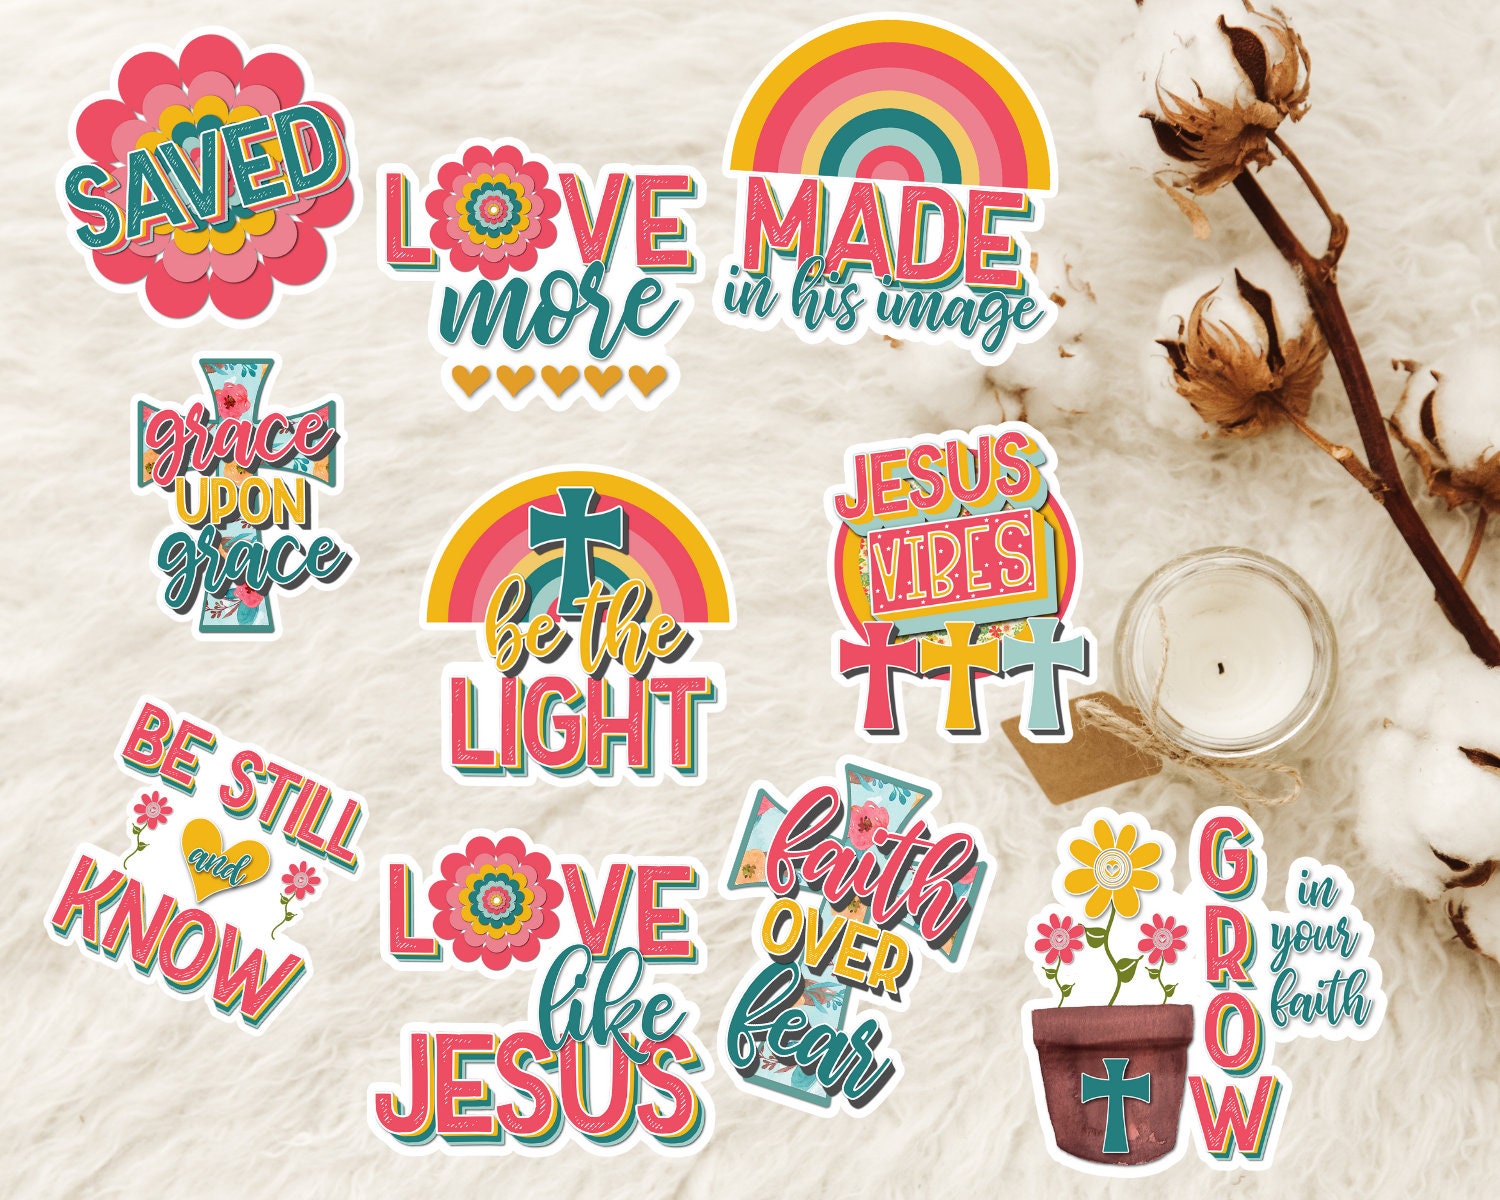 Psalm Religious Stickers for Christians, Bible Scripture Stickers, Christian Stickers with Bible Verse Sticker for Sale by crossesforever